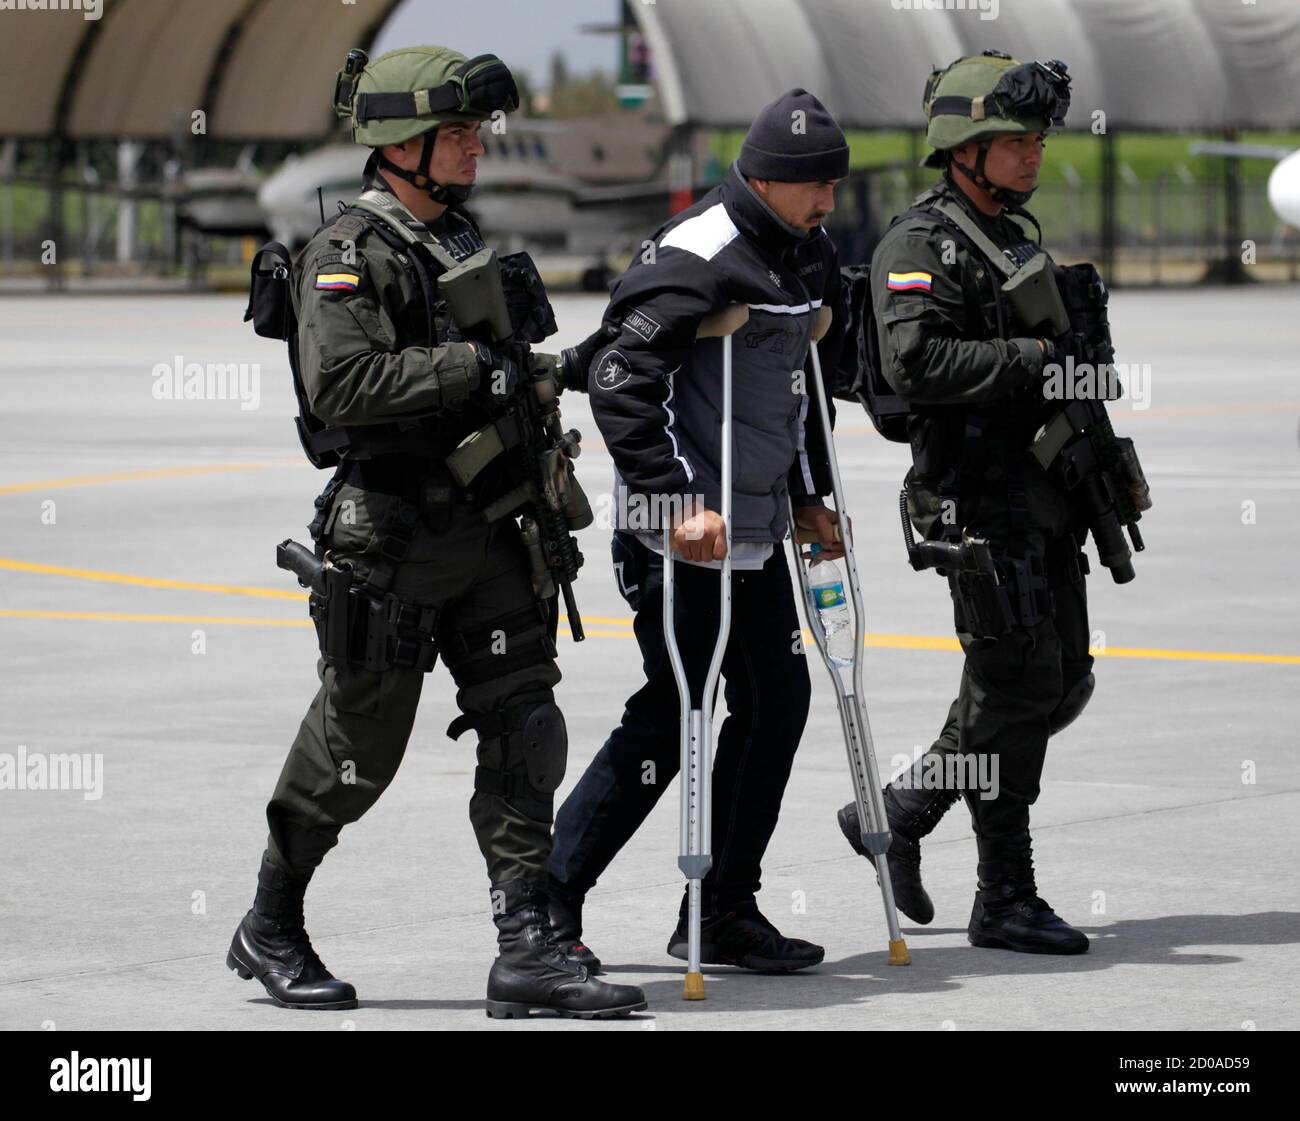 Colombian Edison Castro Lopez (C), also known as 'Jairo' or 'Chicanero,' is escorted by the Colombian National Police after being deported from Ecuador at a military base, in Bogota August 6, 2012. Lopez, who is a suspected member of the Revolutionary Armed Forces of Colombia (FARC), was captured during a joint operation between the Colombian and Ecuadorian police in Ecuador for drug and weapon trafficking, according to local media.  REUTERS/John Vizcaino (COLOMBIA - Tags: CRIME LAW POLITICS MILITARY DRUGS SOCIETY) Stock Photo